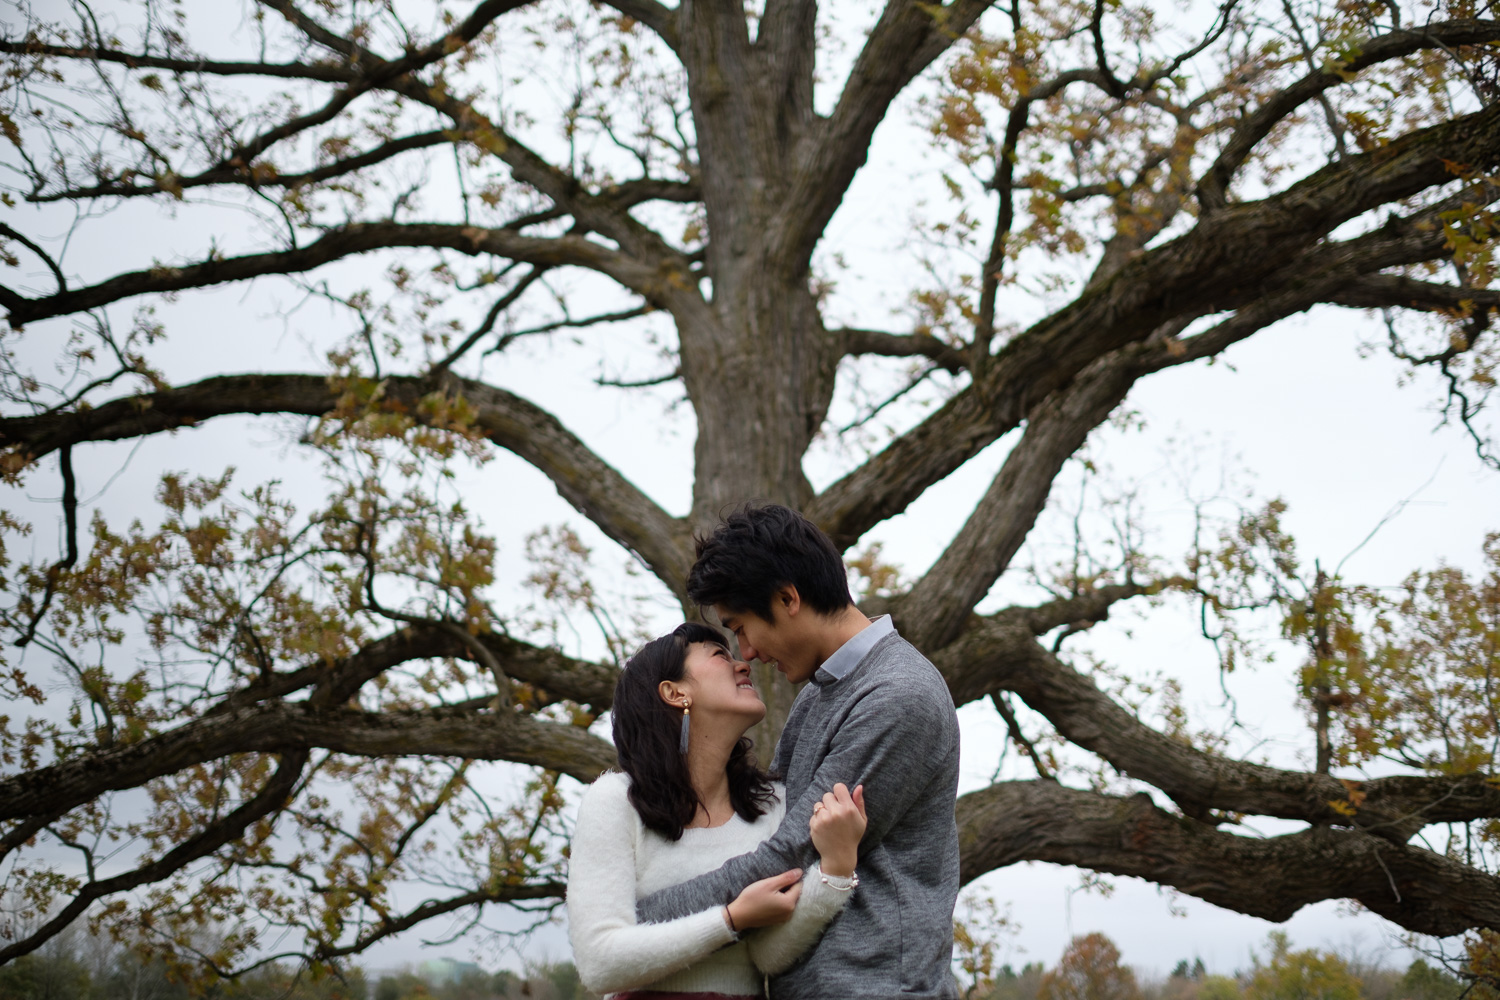  An engagement picture from Huong and Aaron’s Ottawa engagement session this fall by Toronto wedding photographer Scott Williams (www.scottwilliamsphotographer.com) 